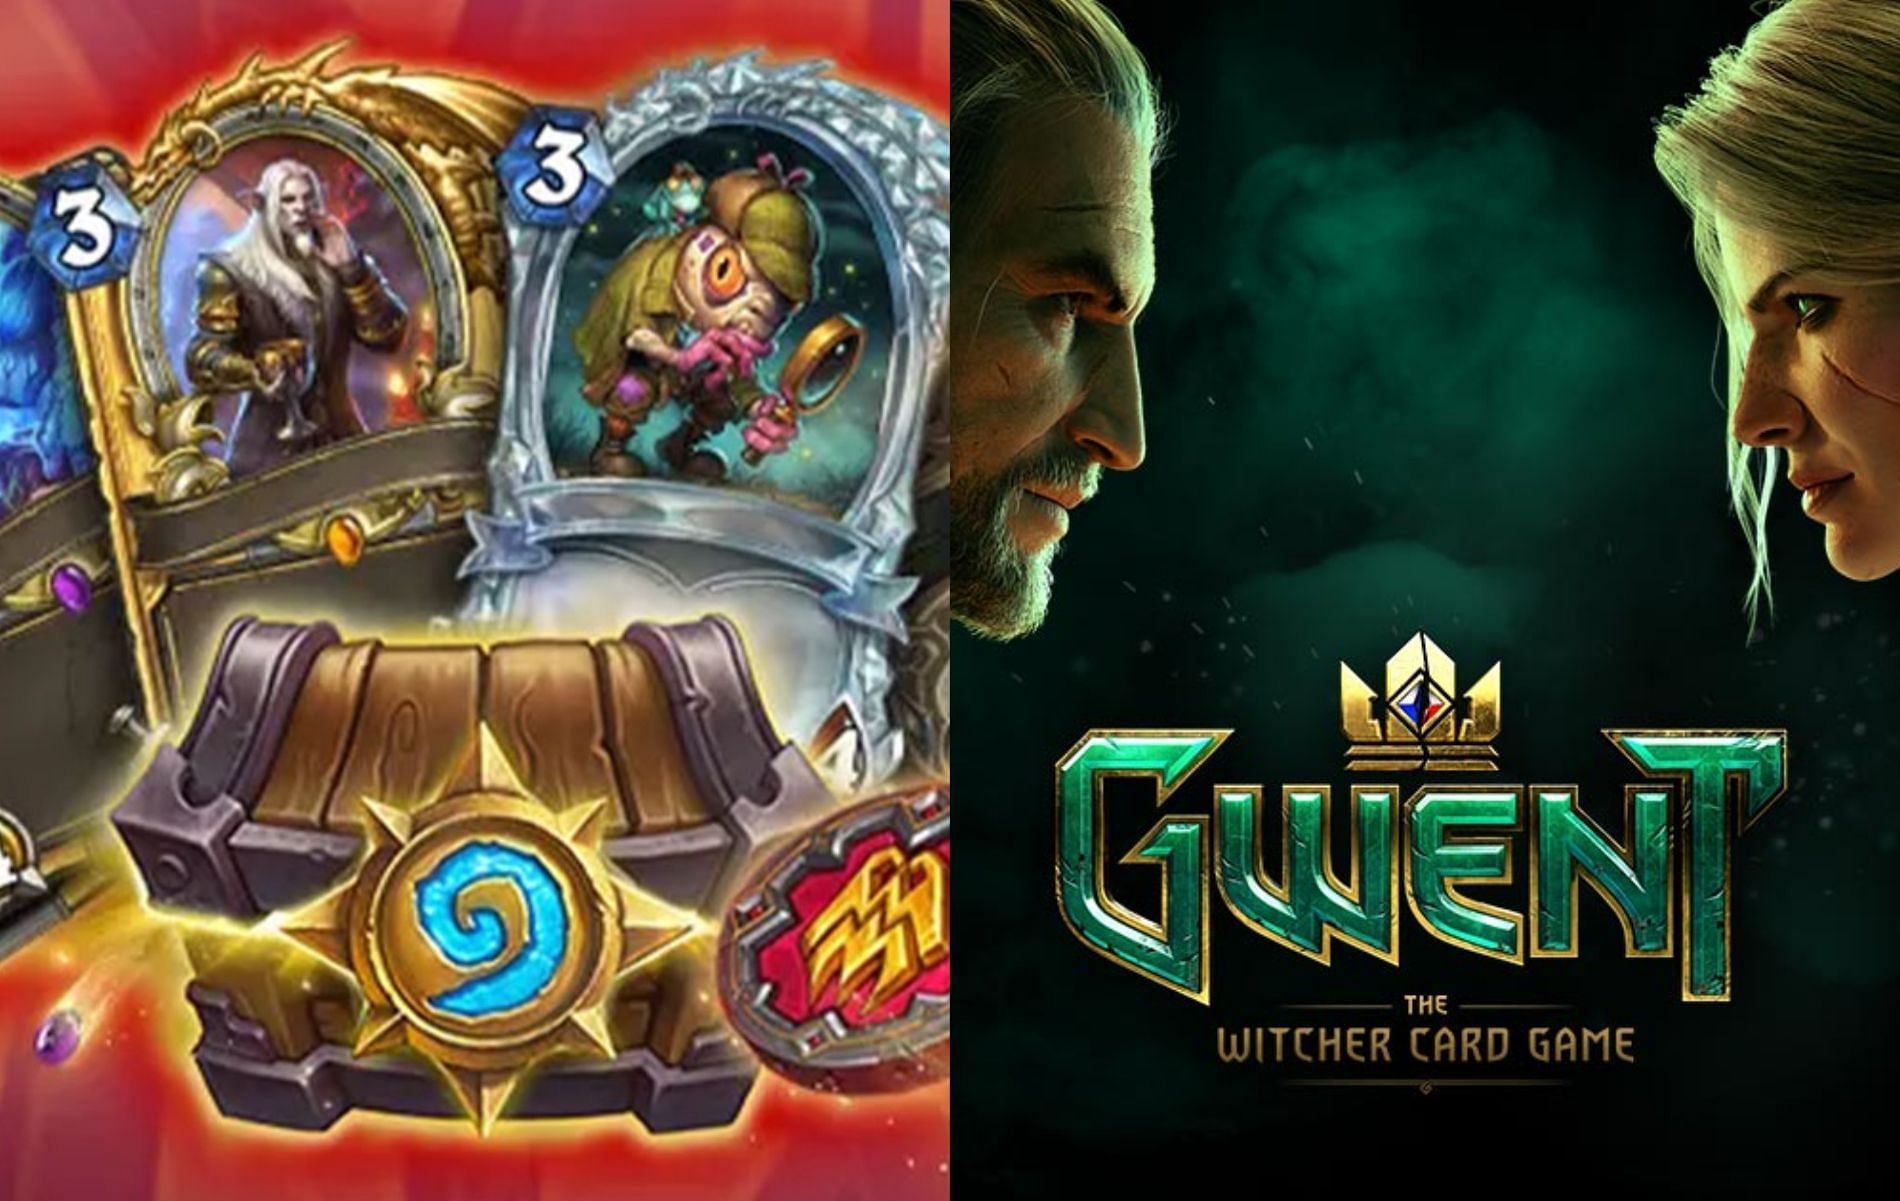 From deck builders to fast-paced strategic ones, try out these online strategic card games with your friends now (Images via Blizzard Entertainment and CD Projekt Red)